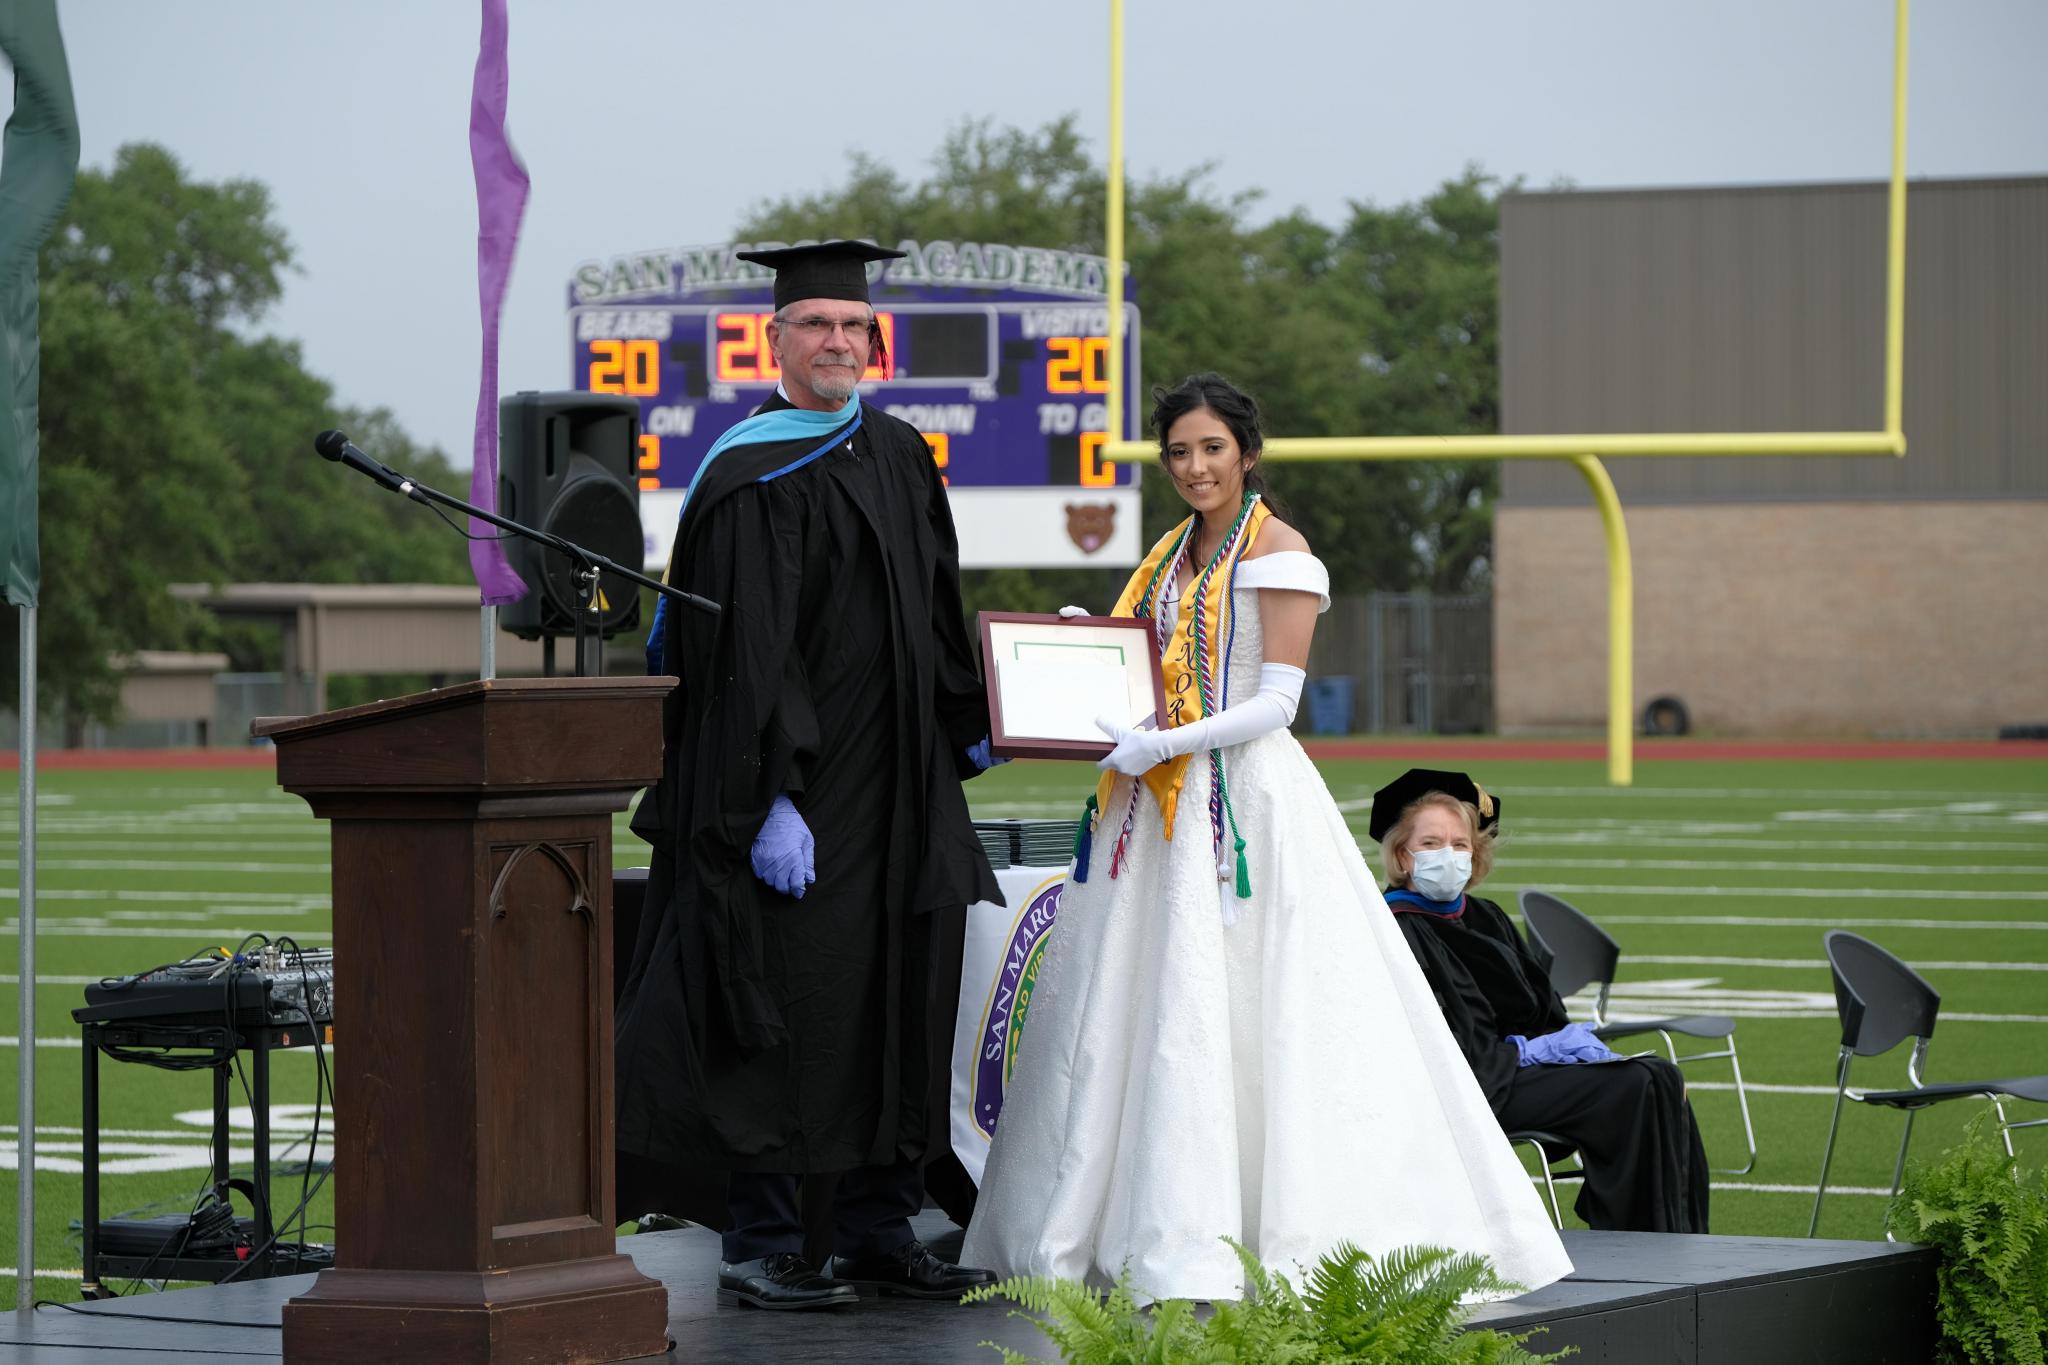 Cendra Rodriguez of San Marcos receives the salutatorian award from Bob Wiegand, SMA Senior Vice President, before giving her speech at Commencement. Rodriguez will attend Baylor University in the fall to major in biology on a pre-med track.